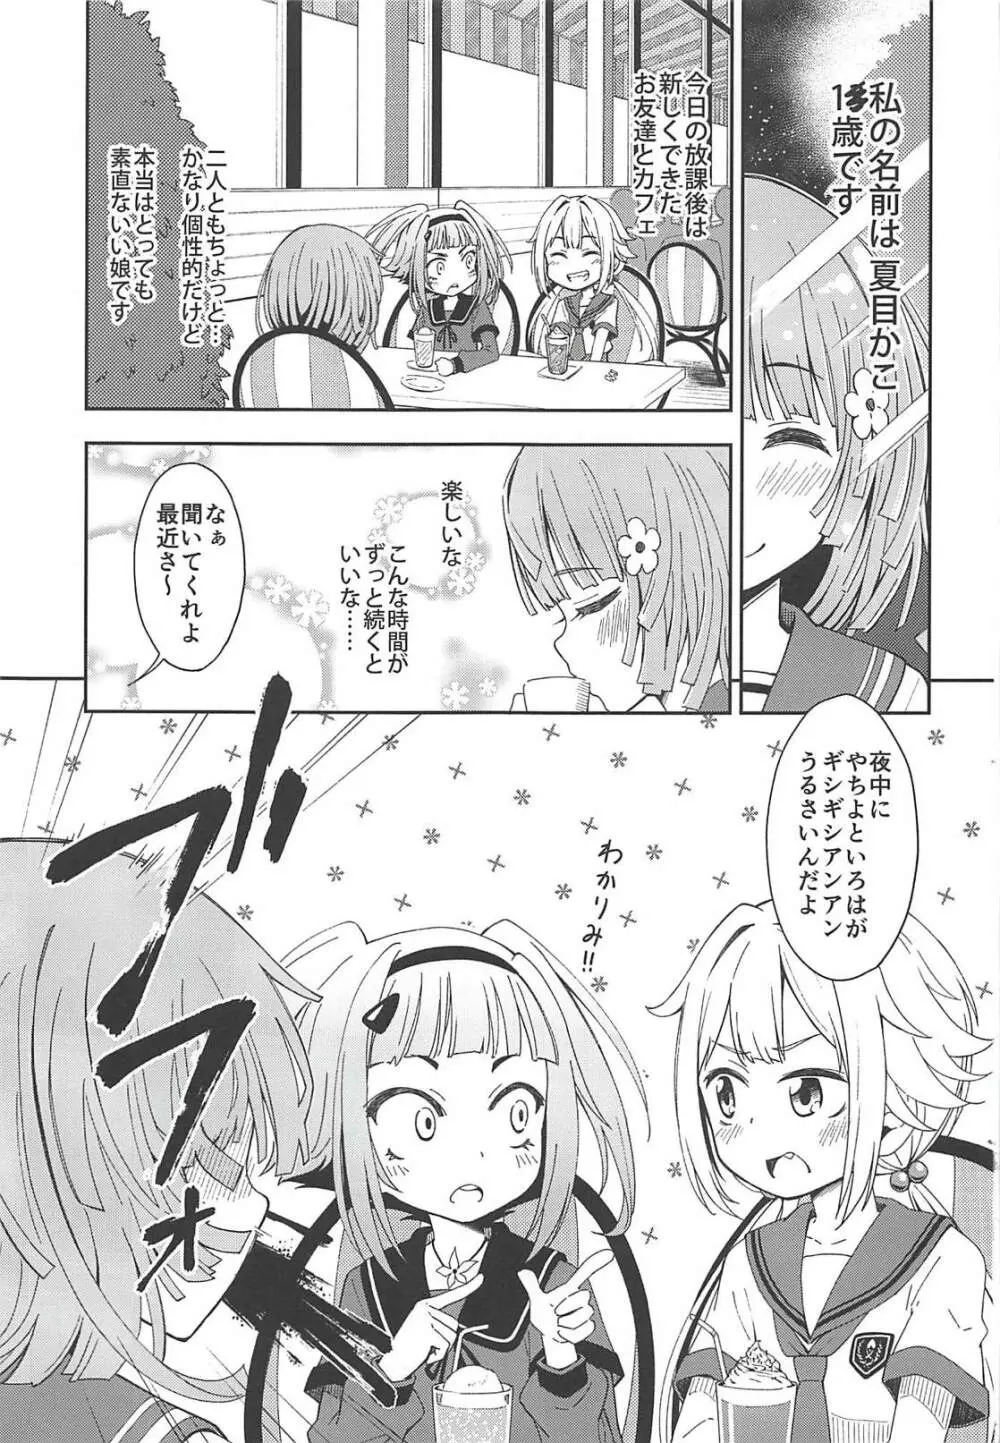 Lovely Girls' Lily Vol.17 - page2